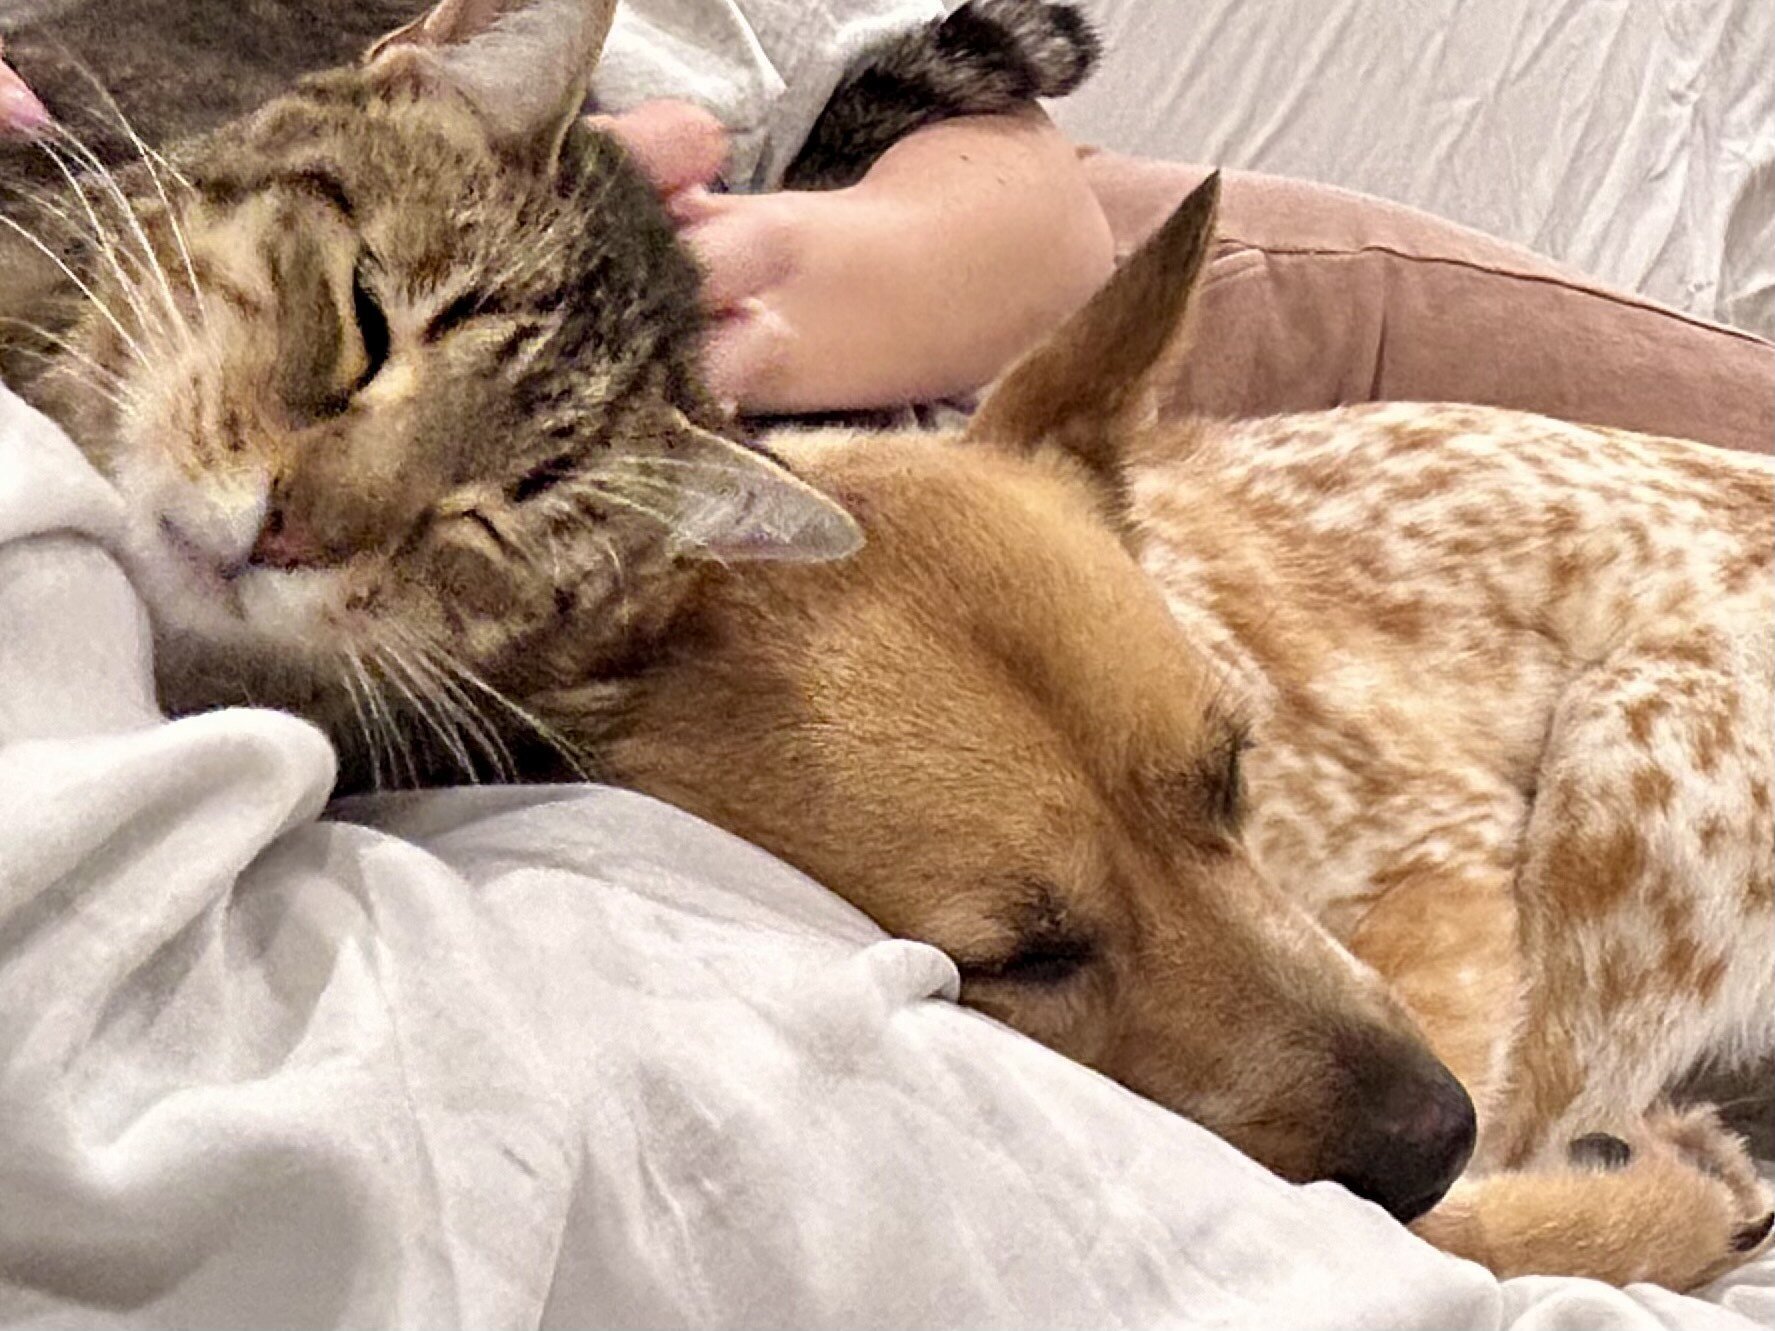 dog-and-cat-snuggling